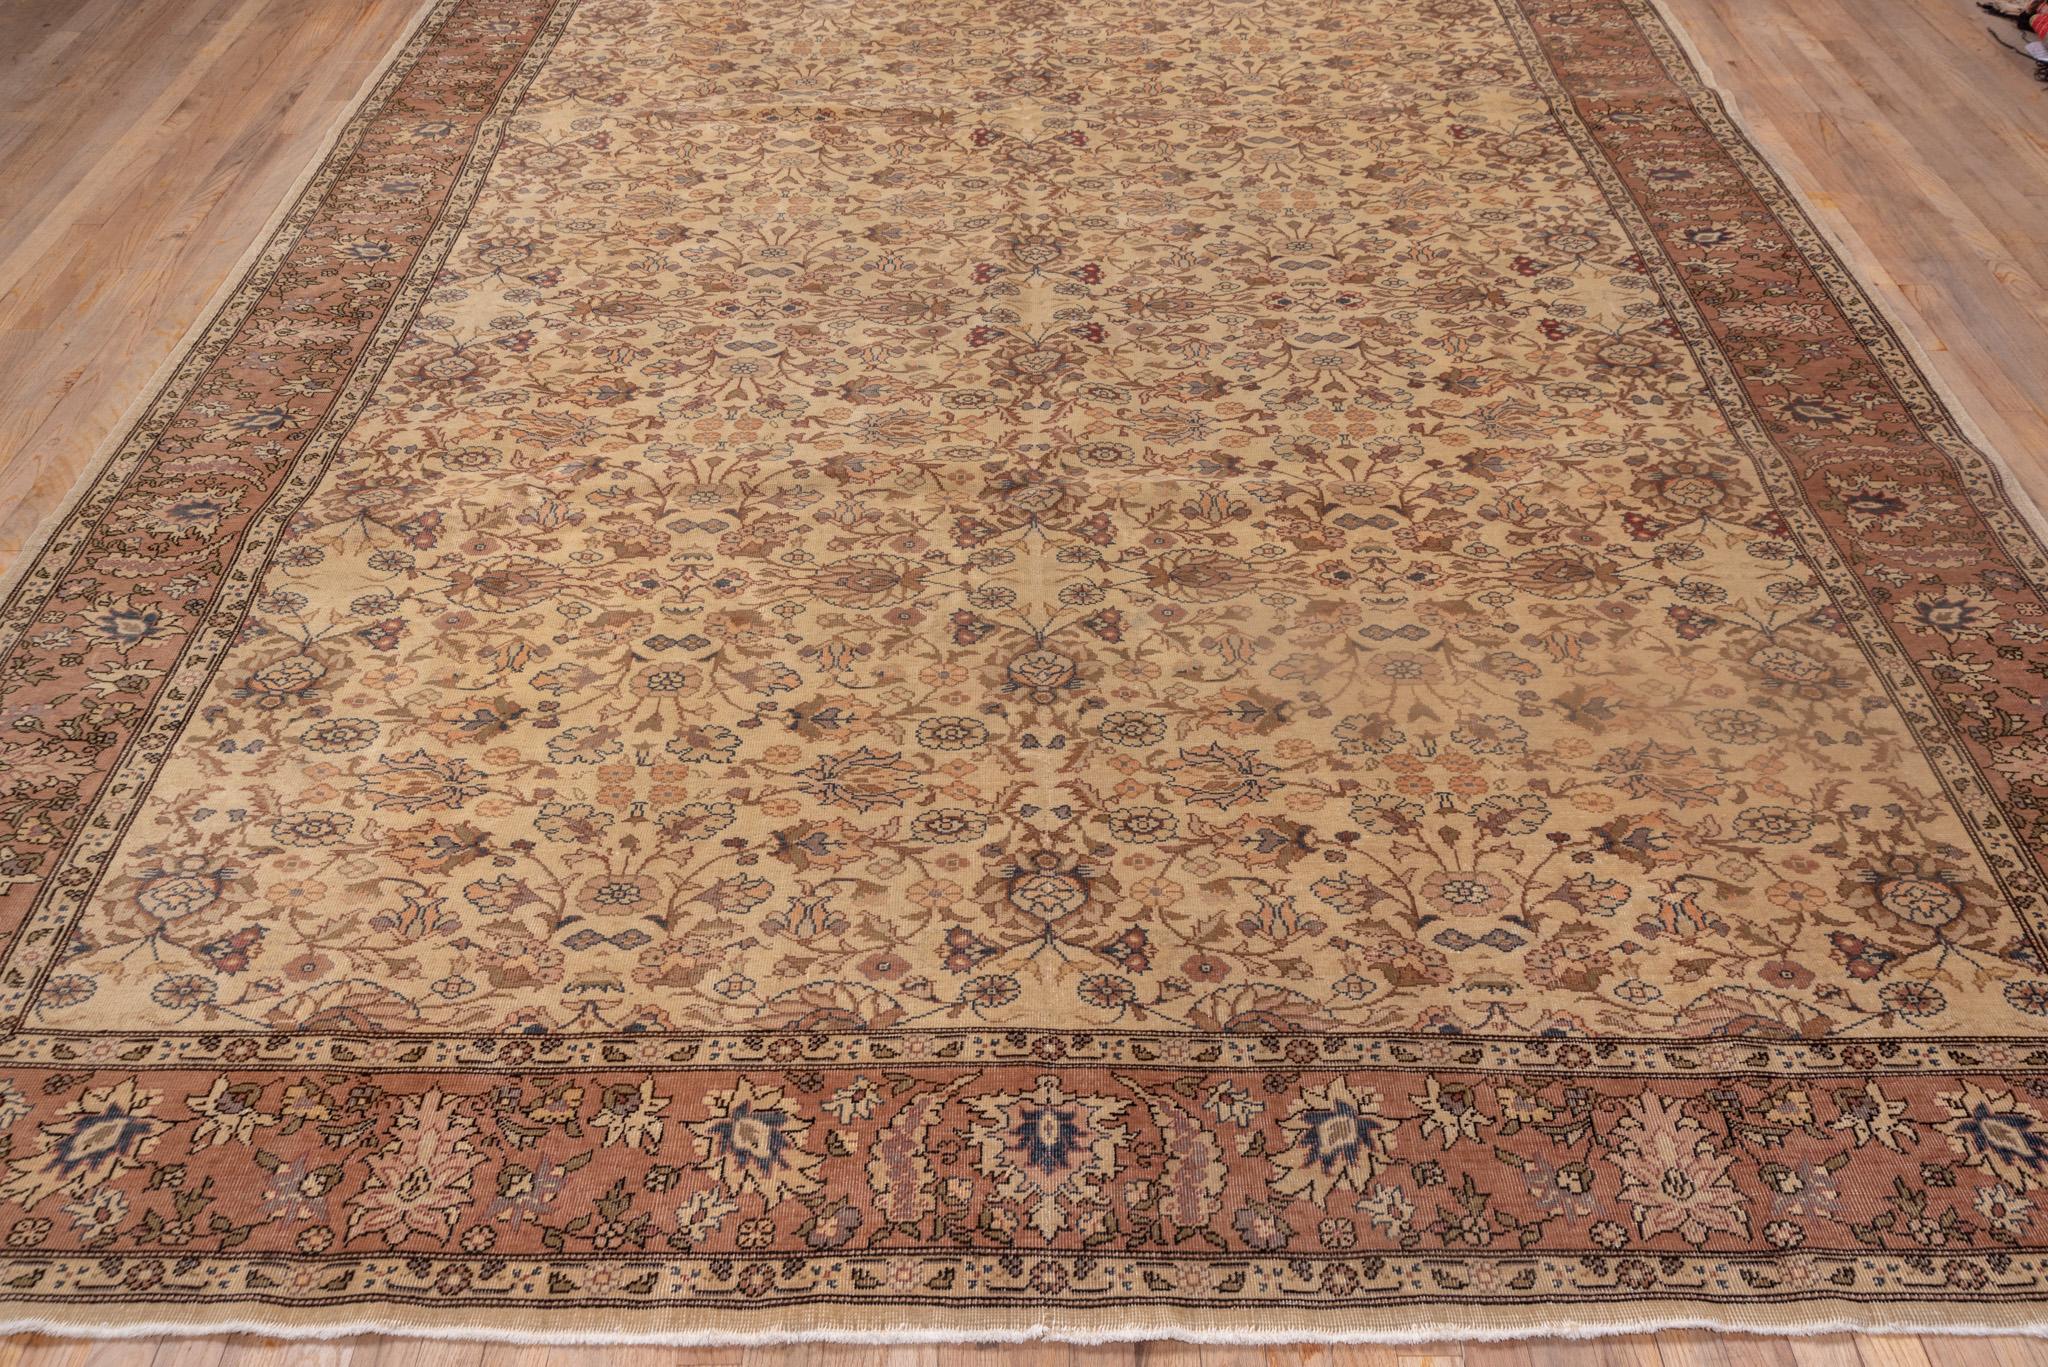 A Sivas Rug circa 1940. Hand knotted, made of 100% wool yarn.